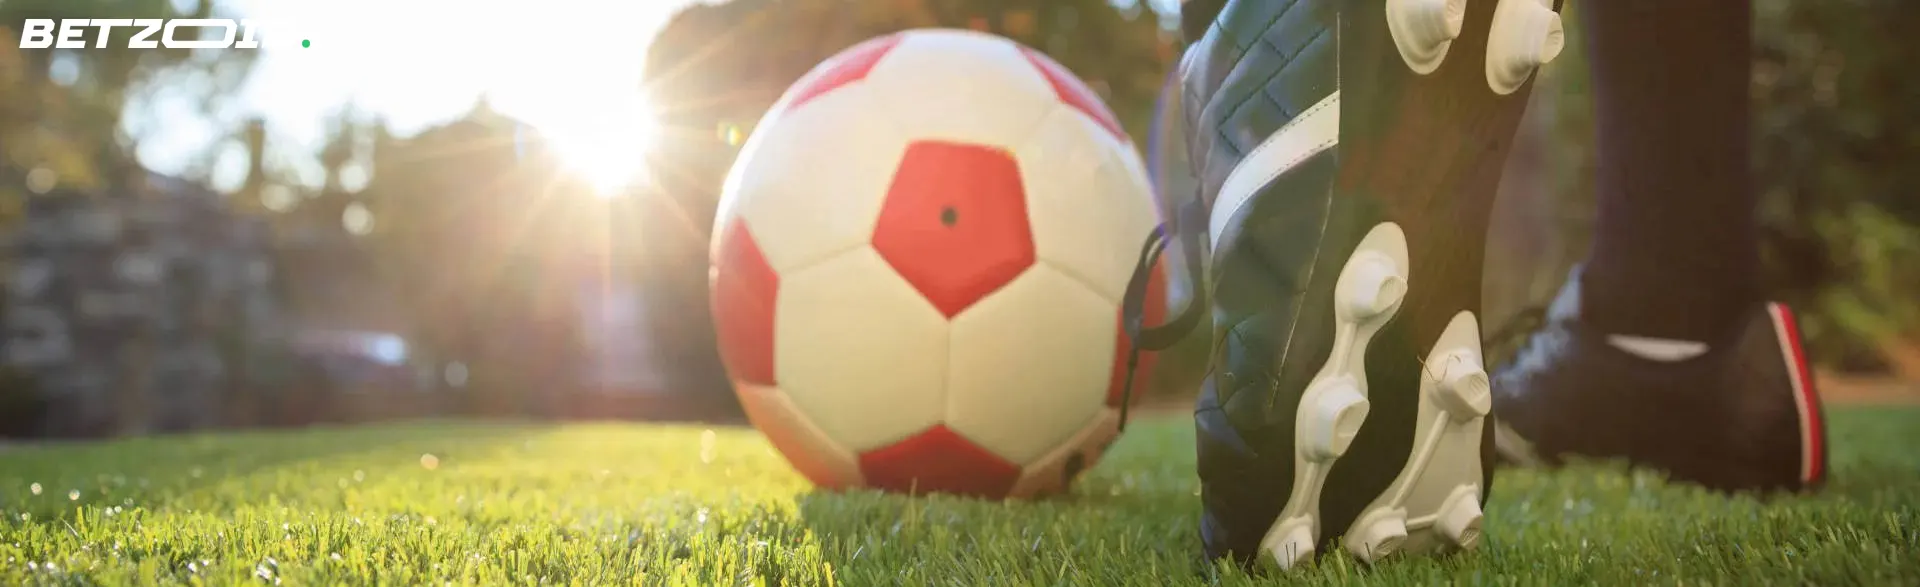 Close-up view of a soccer ball on a grassy field with a player's foot about to kick it, symbolizing Manitoba sports betting sites.